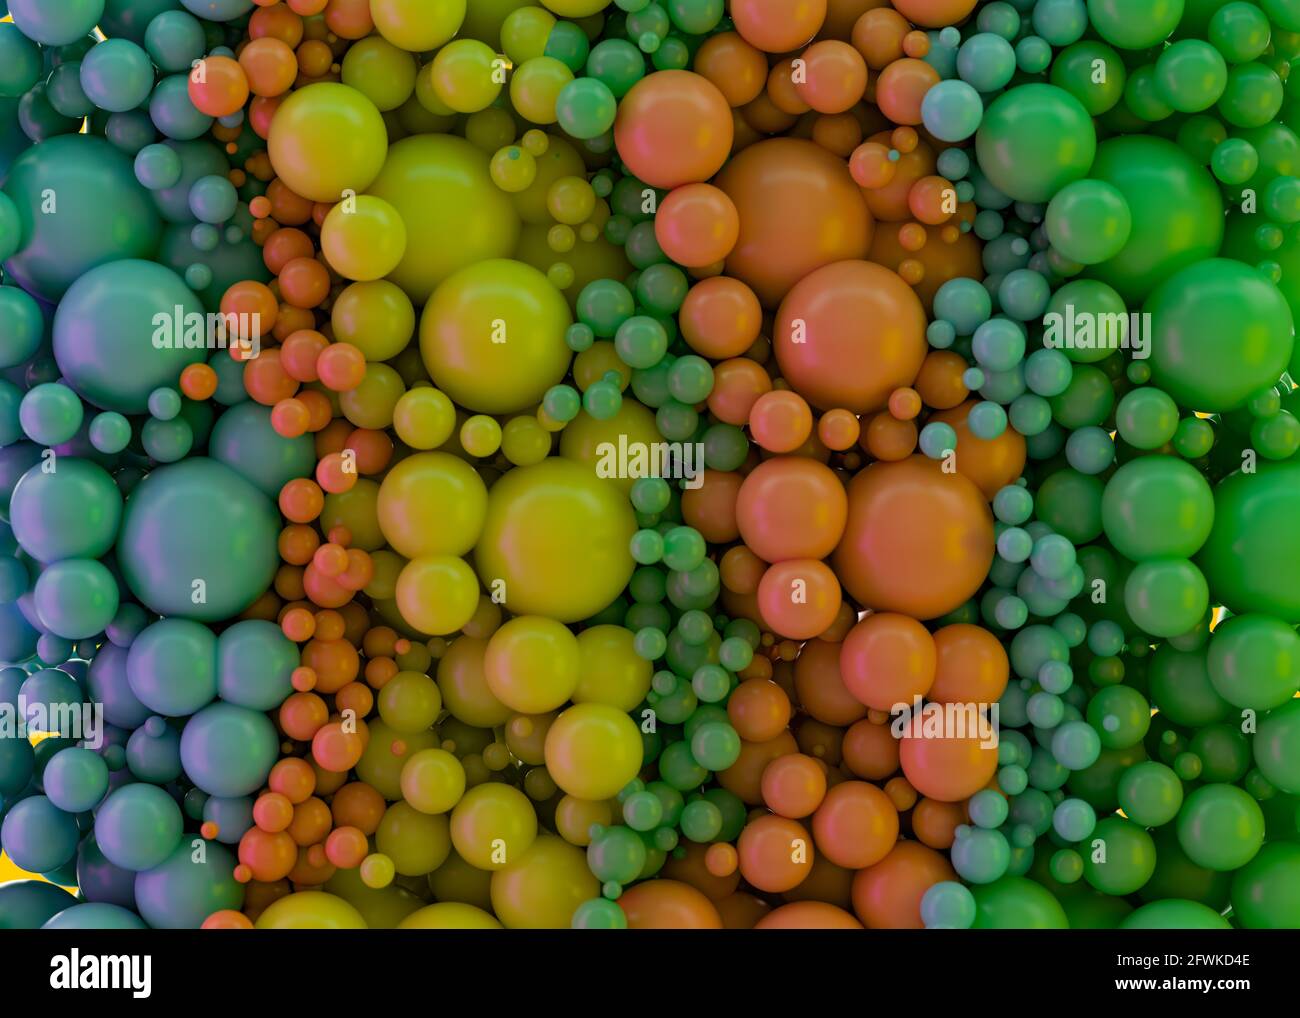 Abstract Background Of Close Up Multi Colored Beads Stock Photo